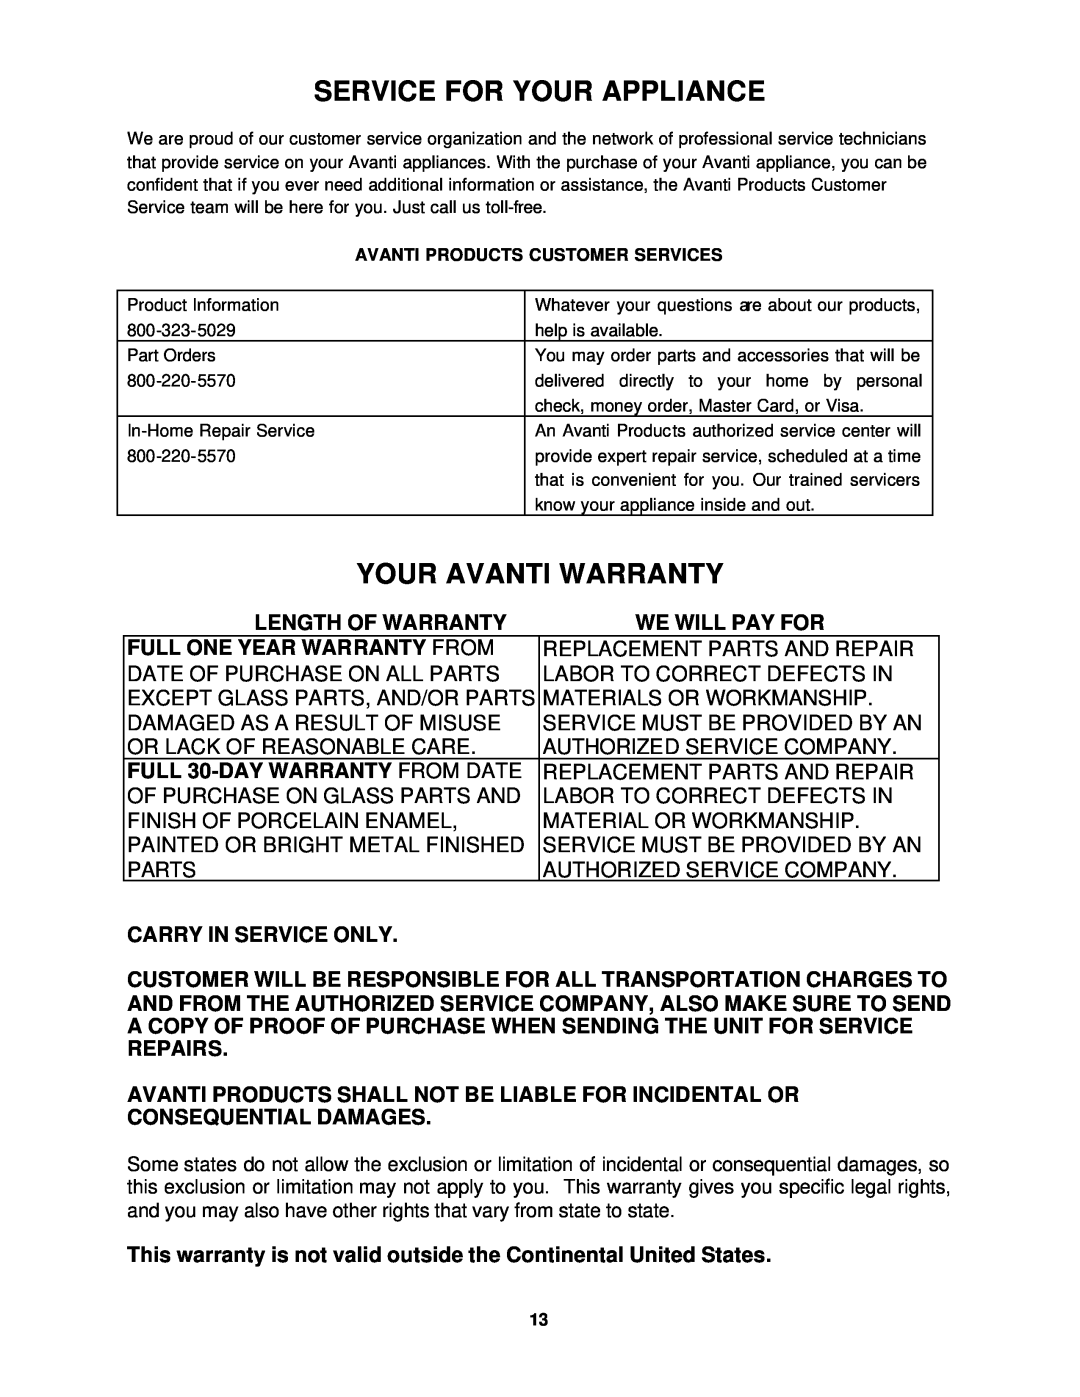 Avanti T-9 Service For Your Appliance, Your Avanti Warranty, Length Of Warranty, We Will Pay For, Carry In Service Only 